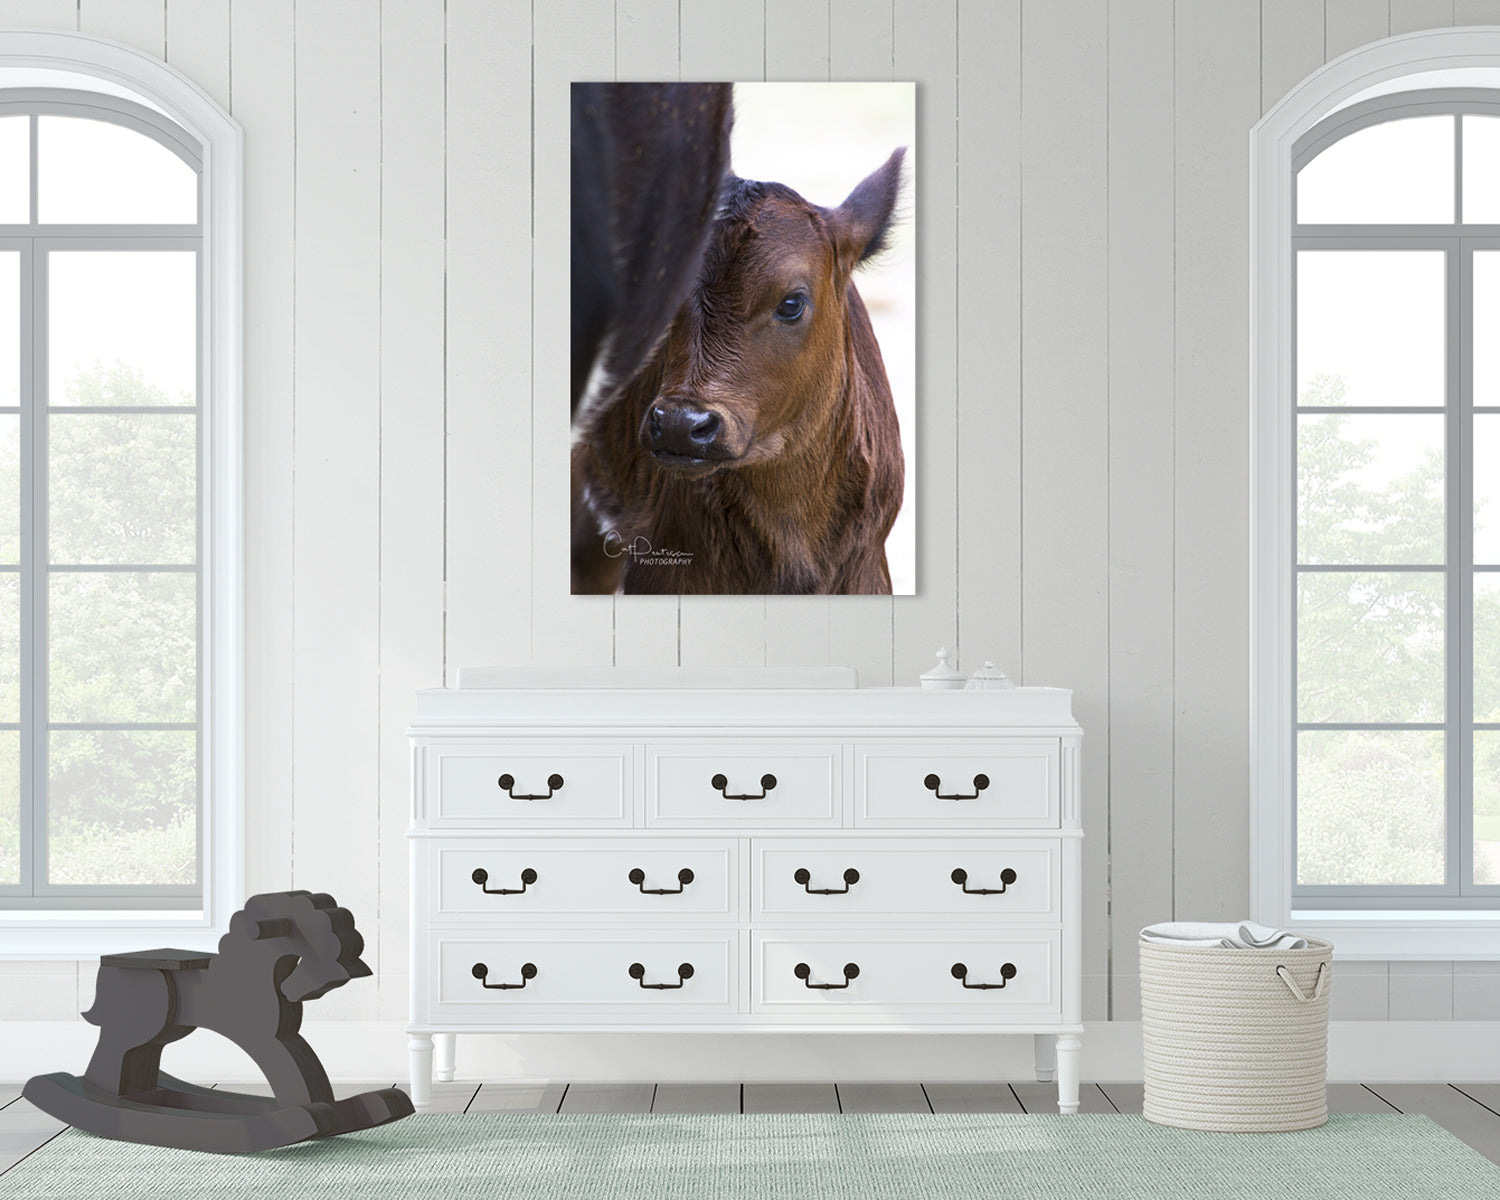 Livestock Angus calf nestled up by Angus Cow. Image hanging over dresser in nursery. Cat Pentescu Photography